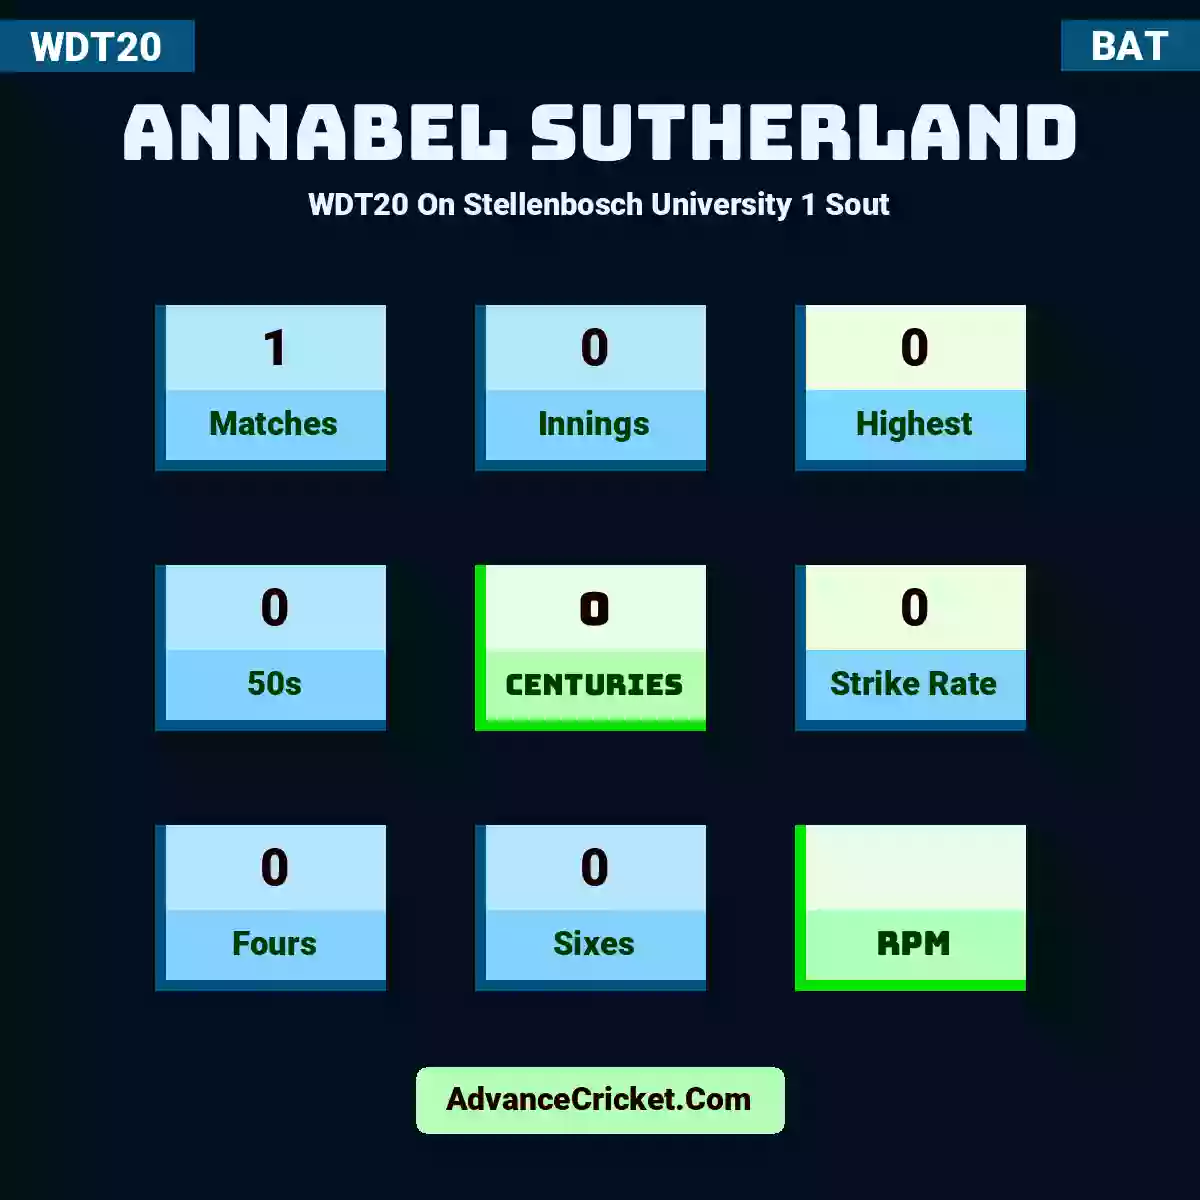 Annabel Sutherland WDT20  On Stellenbosch University 1 Sout, Annabel Sutherland played 1 matches, scored 0 runs as highest, 0 half-centuries, and 0 centuries, with a strike rate of 0. A.Sutherland hit 0 fours and 0 sixes.